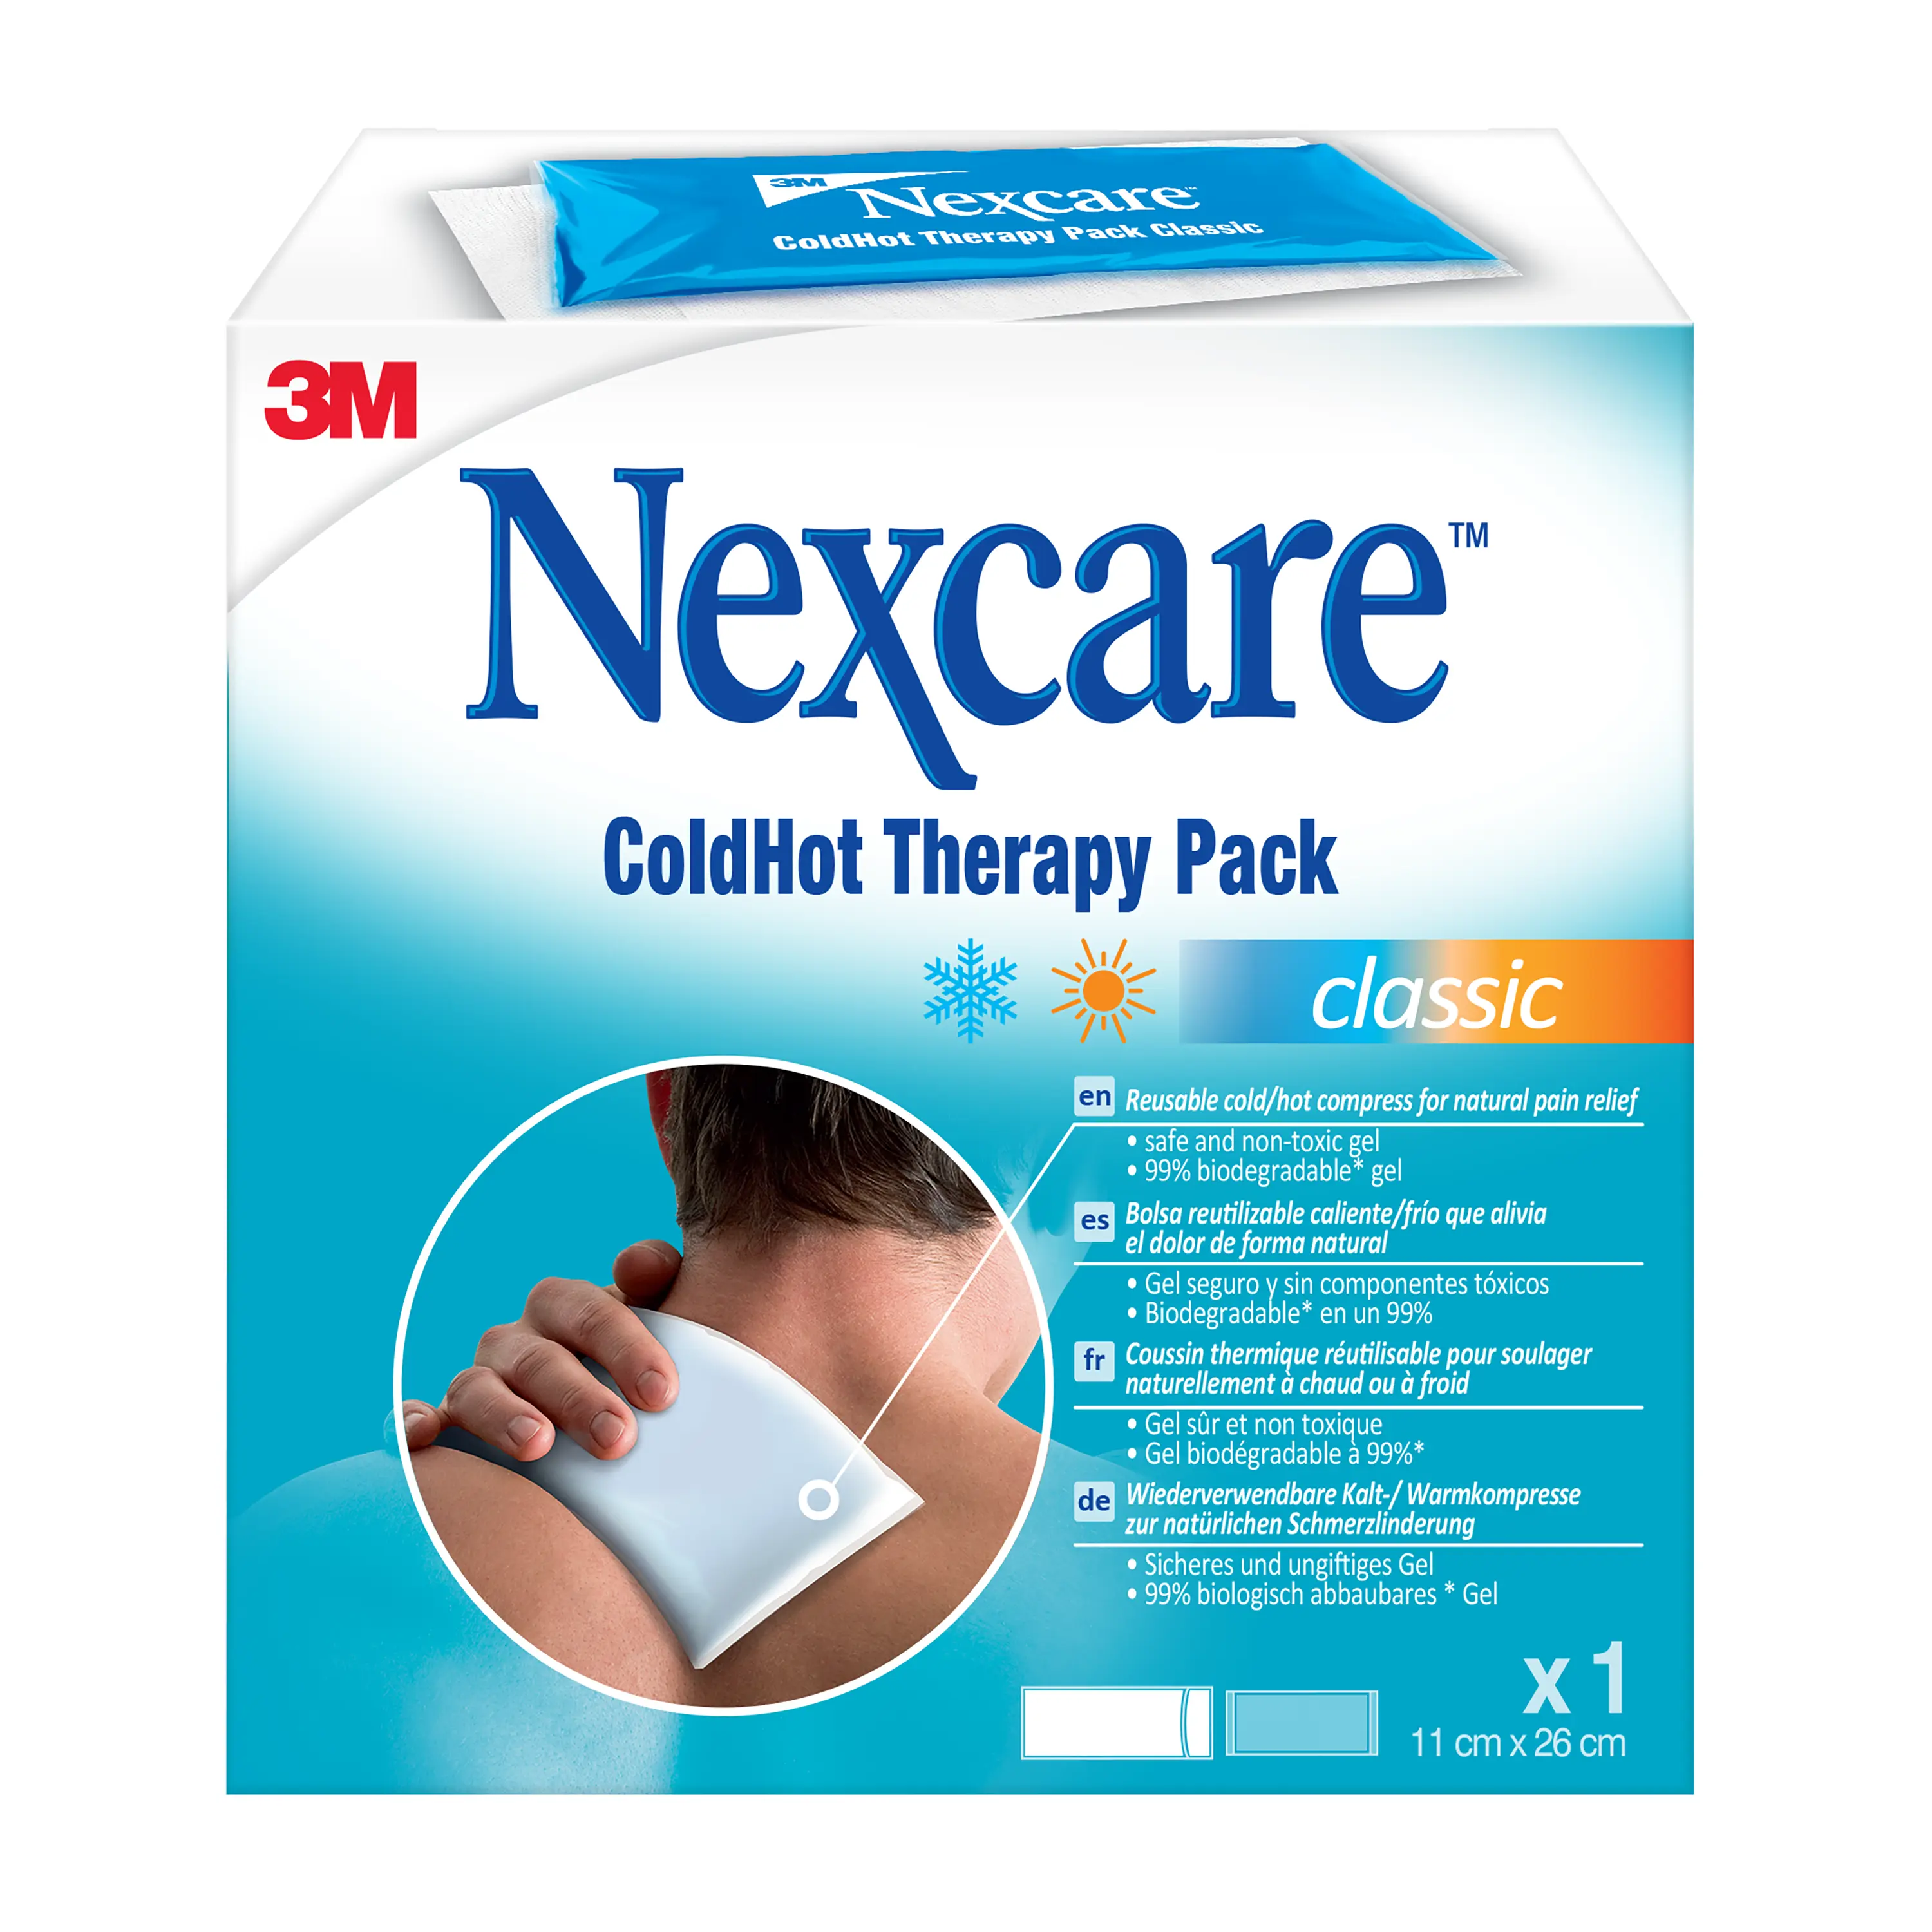 3M Nexcare ColdHot Therapy Pack Classic 11 x 26 cm